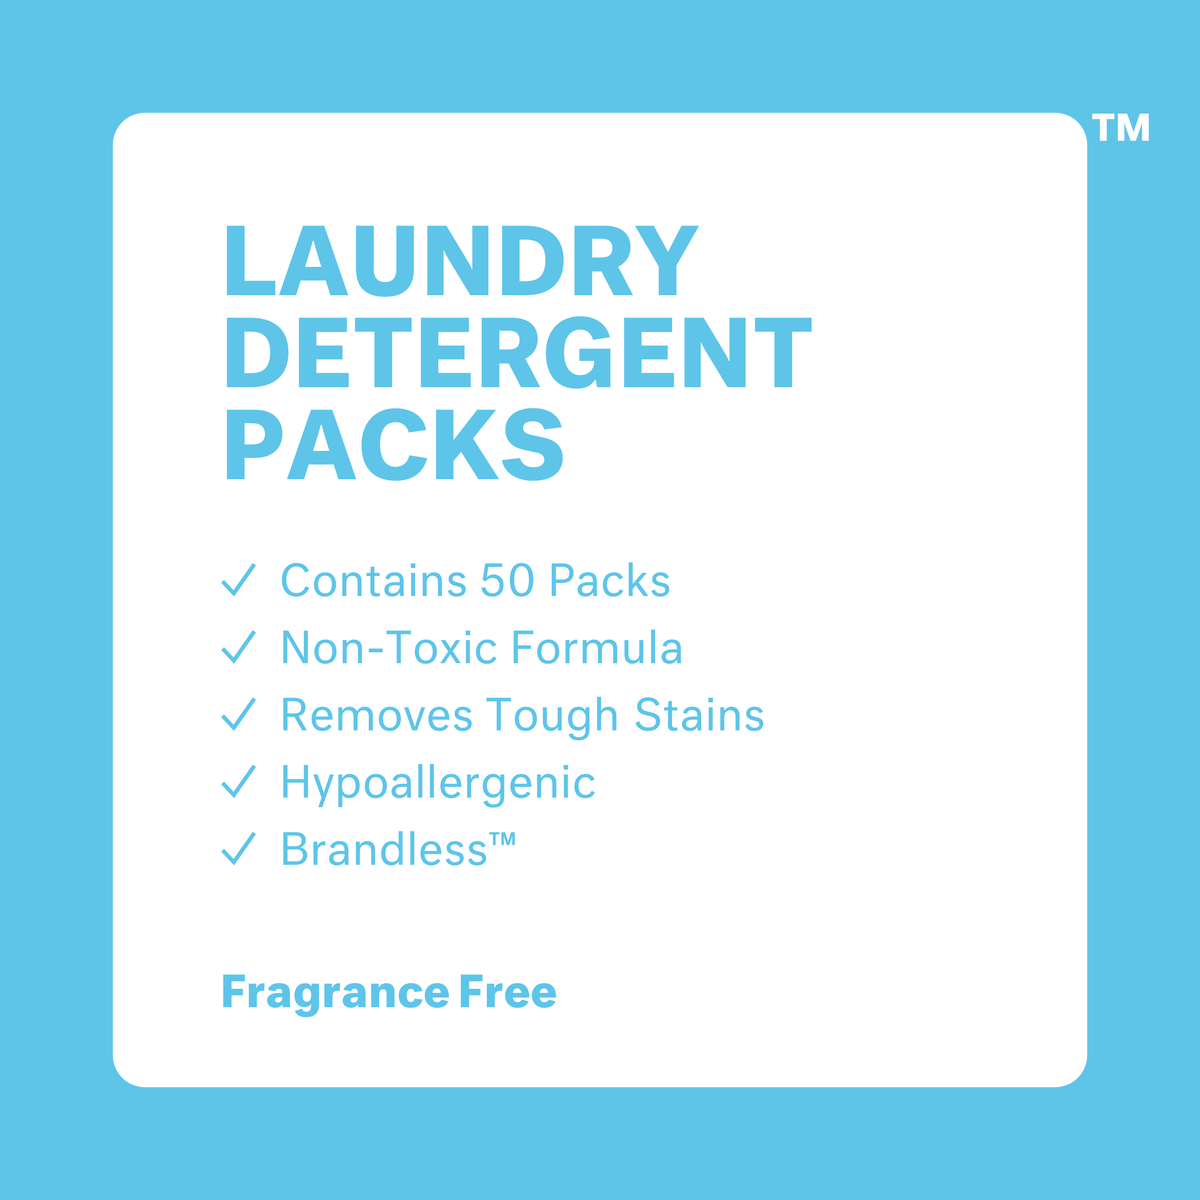 Laundry Detergent Packs: Fragrance Free. Contains 50 packs. Non-toxic formula. Removes tough stains. Hypoallergenic. Brandless.